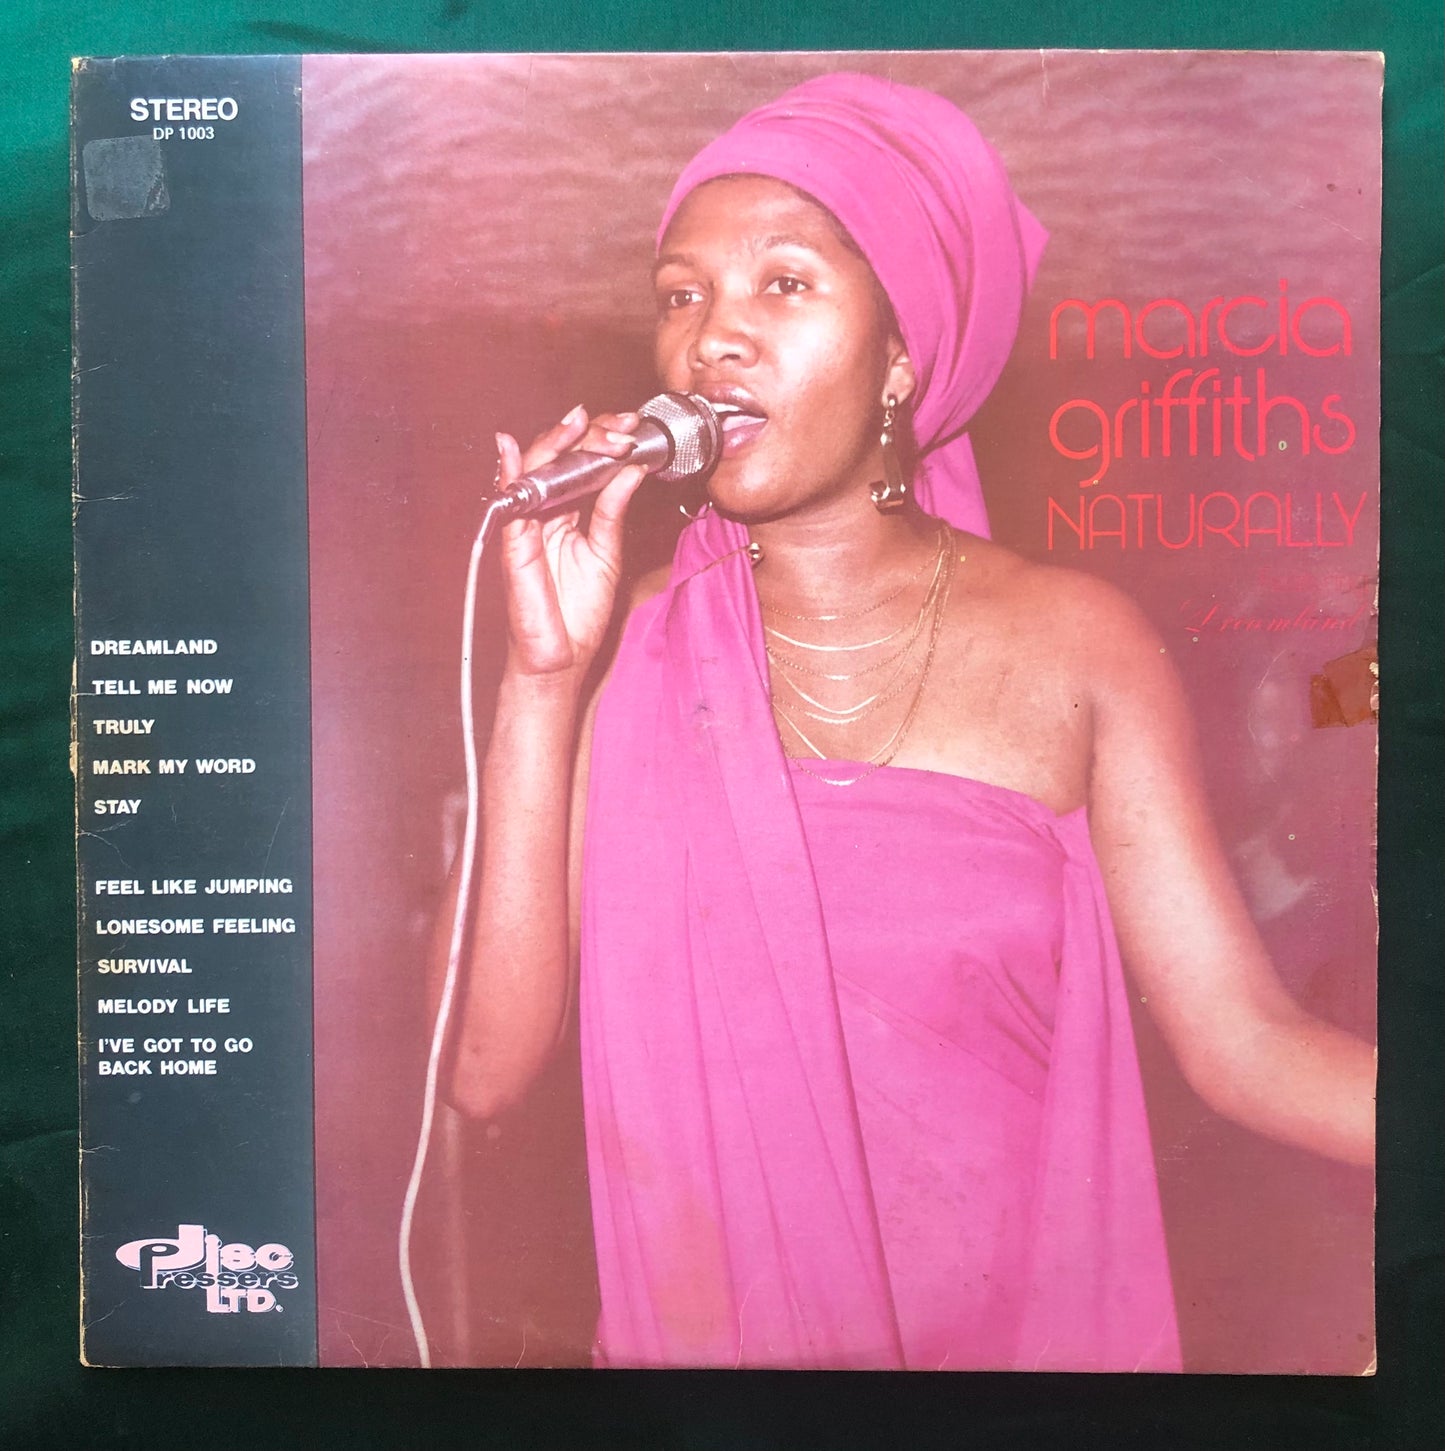 Marcia Griffiths - Naturally 1978 Jamaican press High Note/Disc Pressers